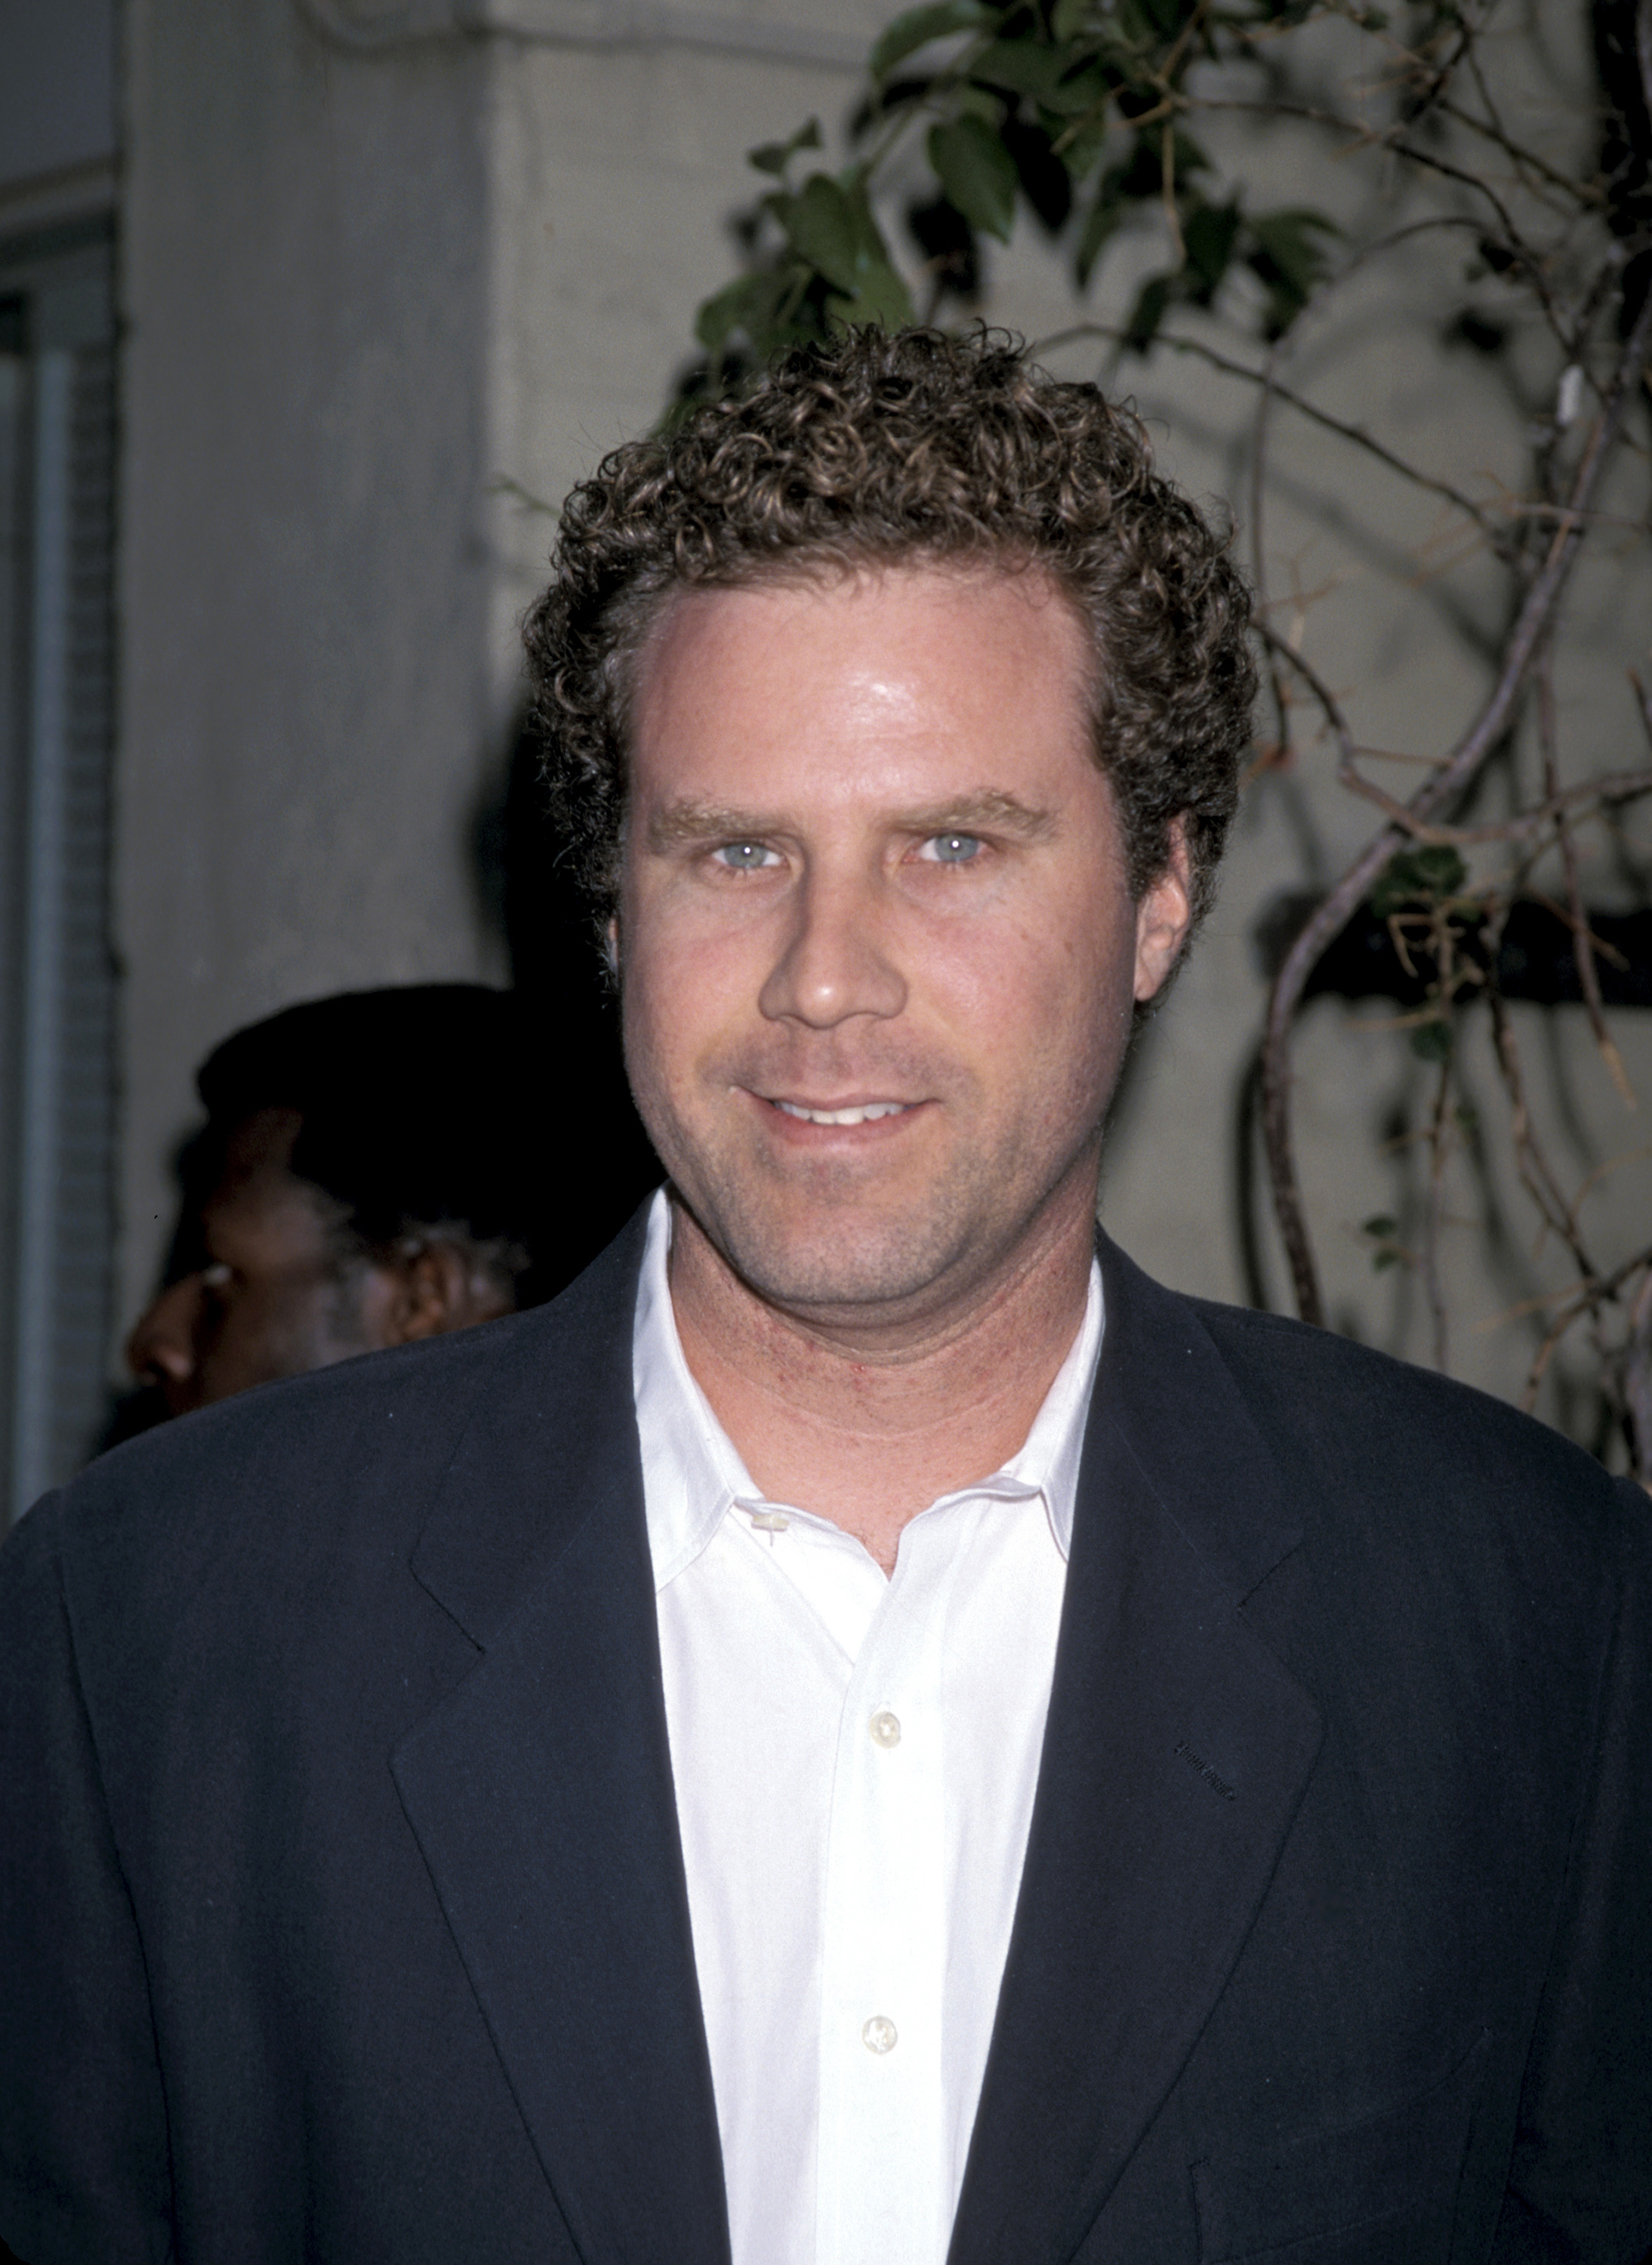 Will Ferrell during the NBC All Star Cocktail Party for Fall TCA in Pasadena, California, in 1999. | Source: Getty Images